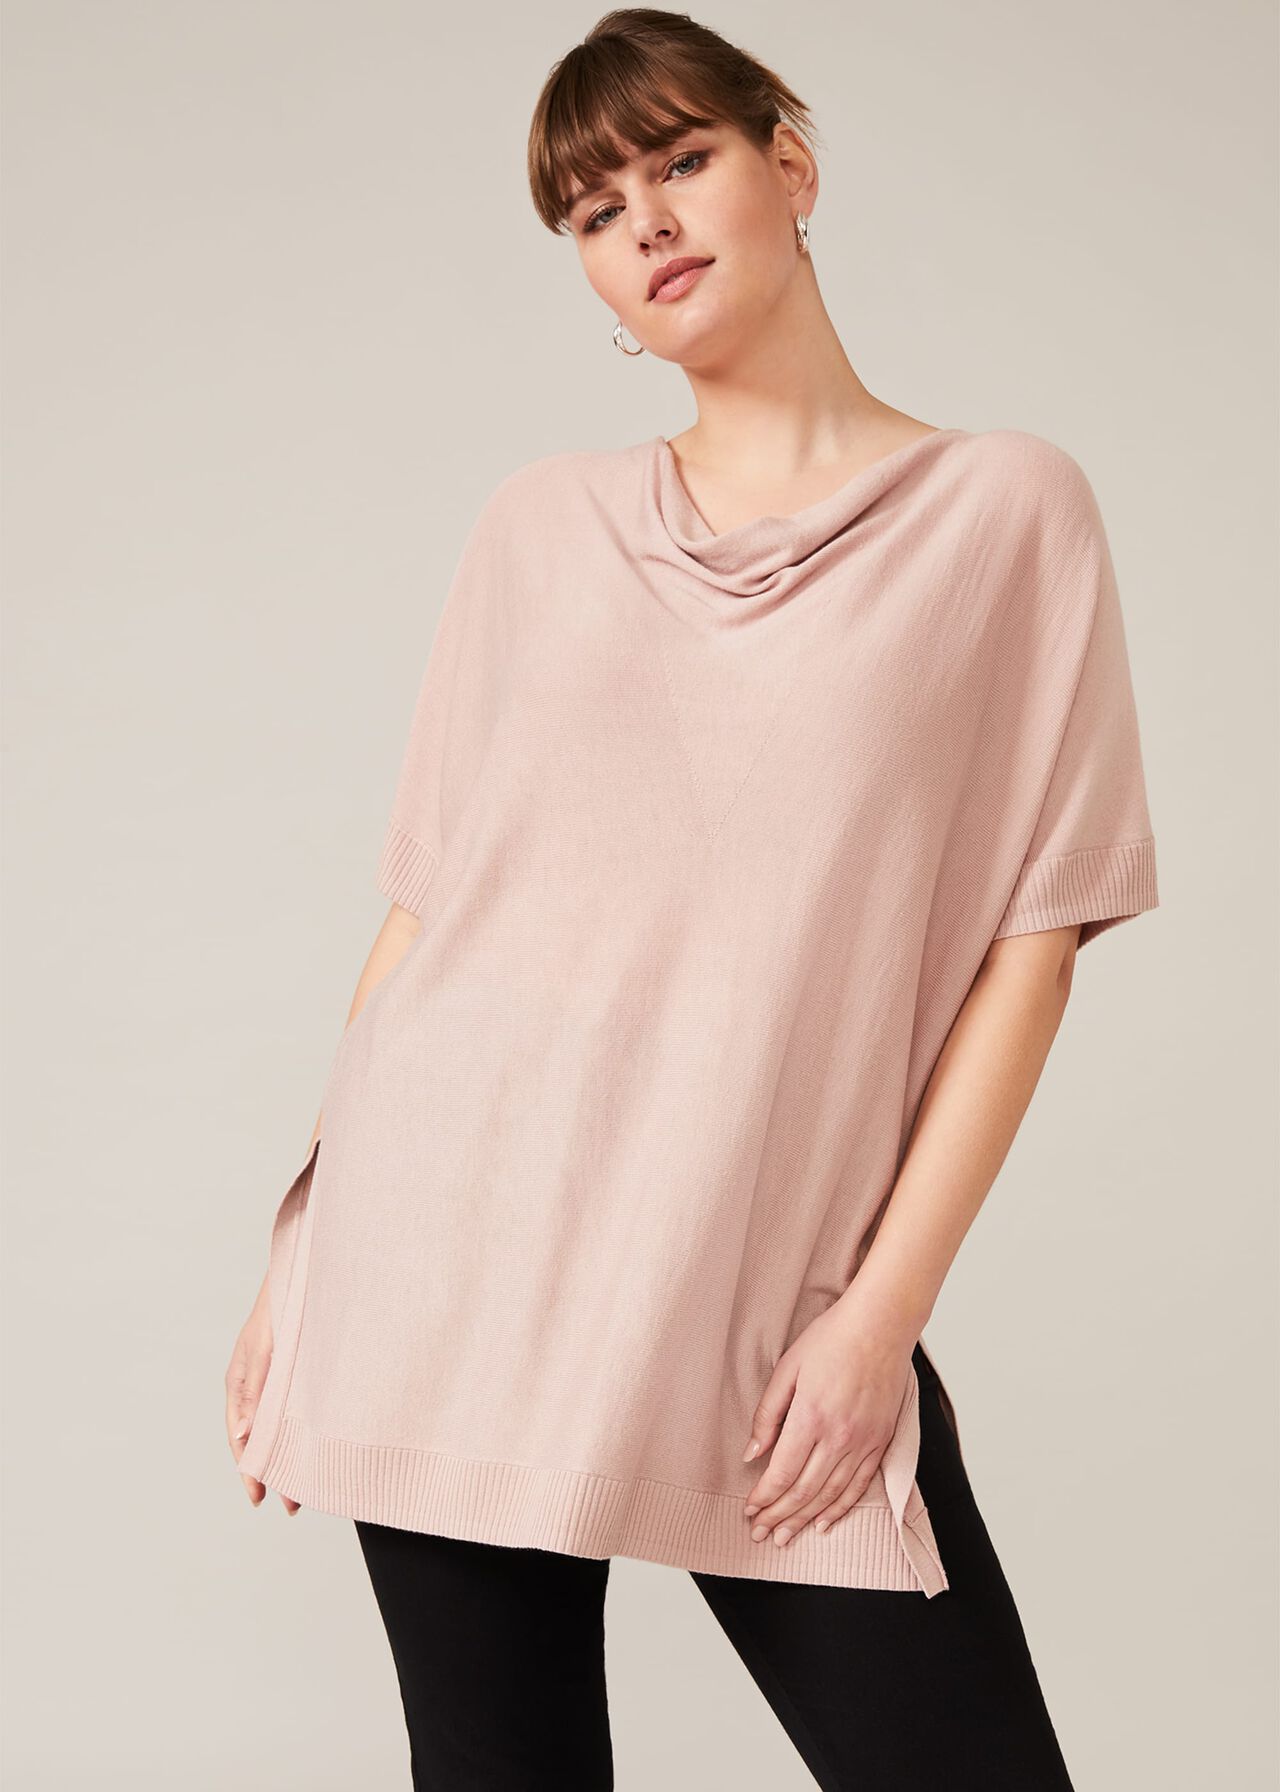 Trudy Cowl Neck Knit Top